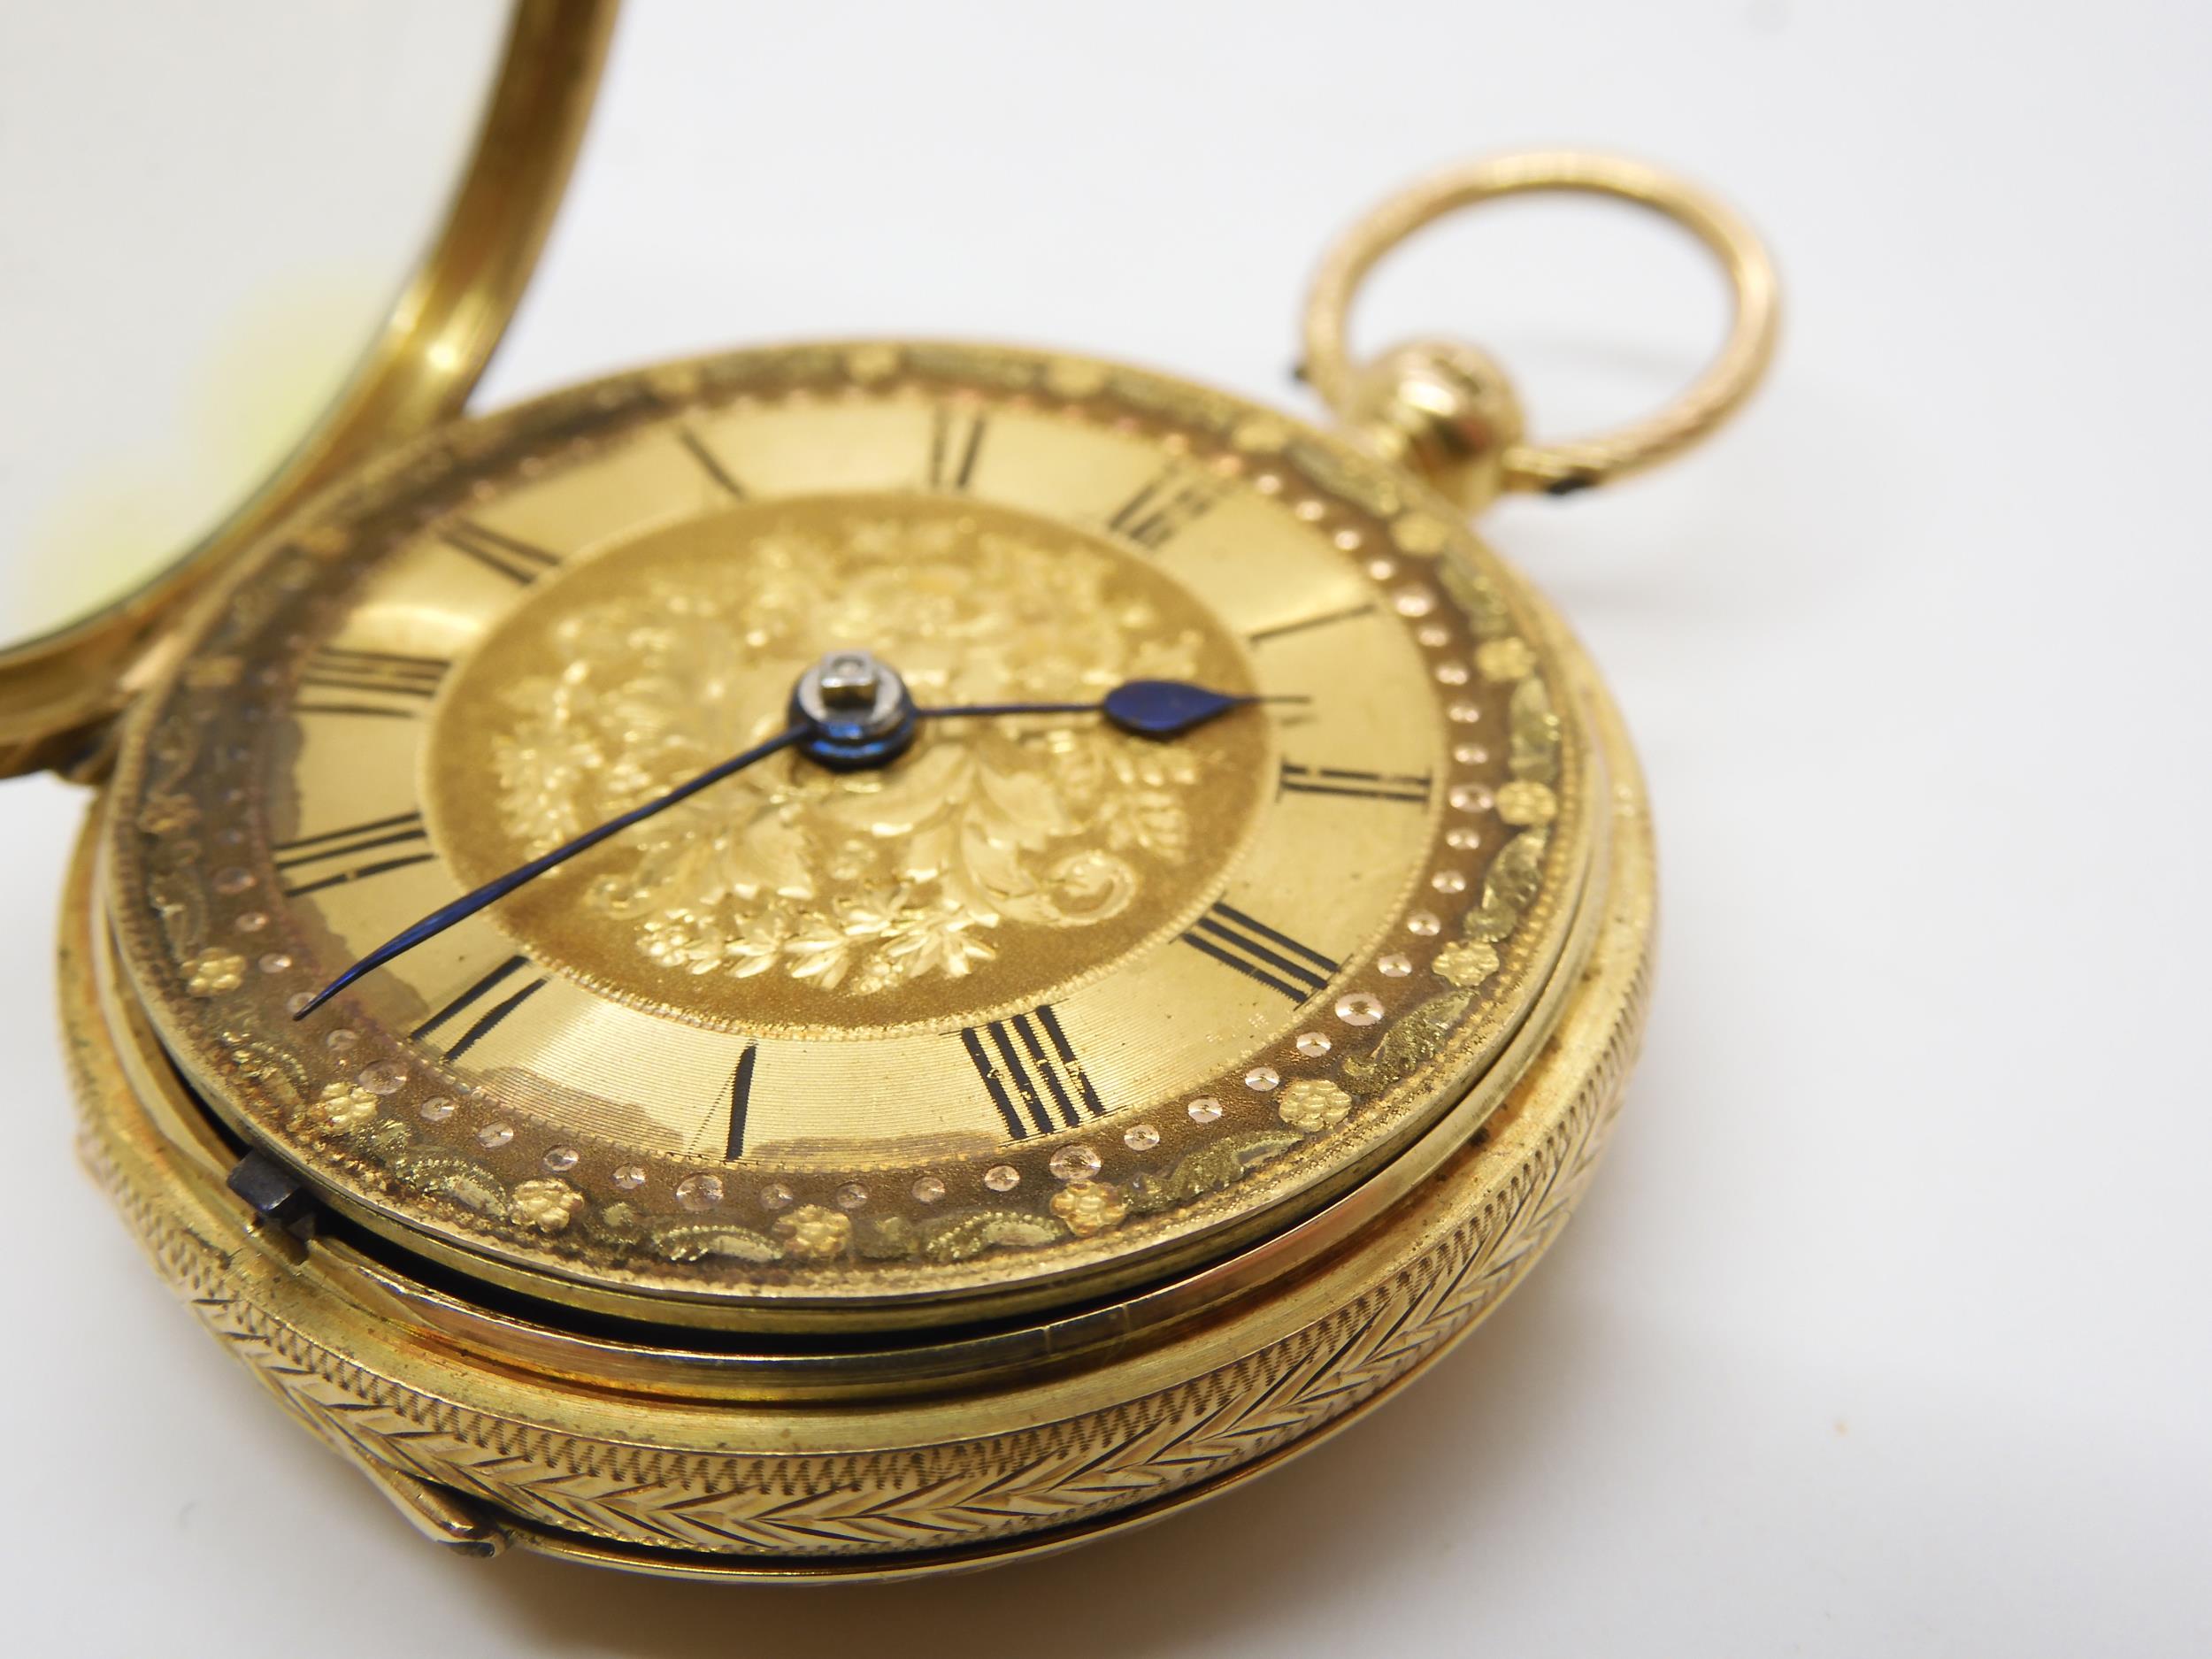 An 18ct gold open face fob watch with decorative gold dial, weight including mechanism 50.1gms, - Image 5 of 6